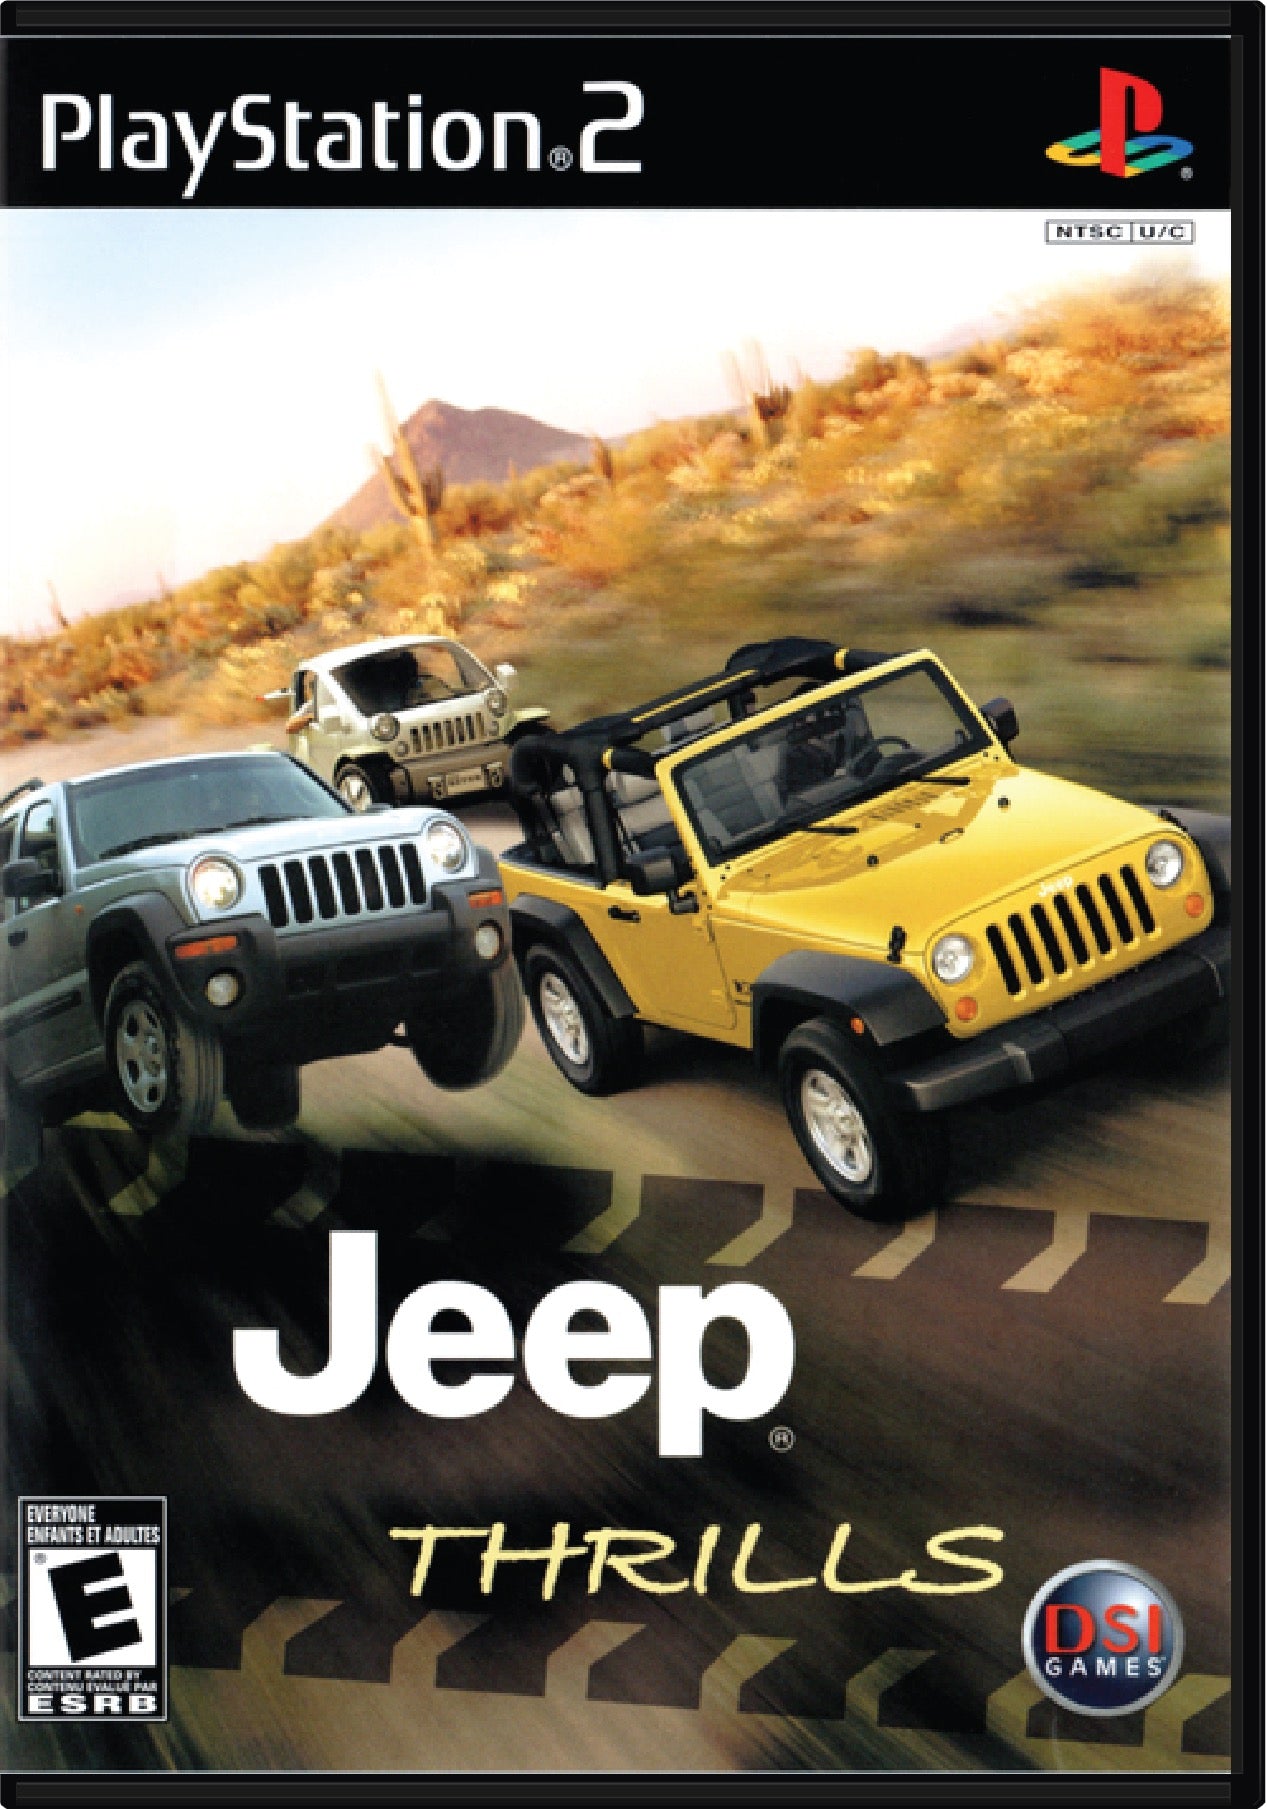 Jeep Thrills Cover Art and Product Photo